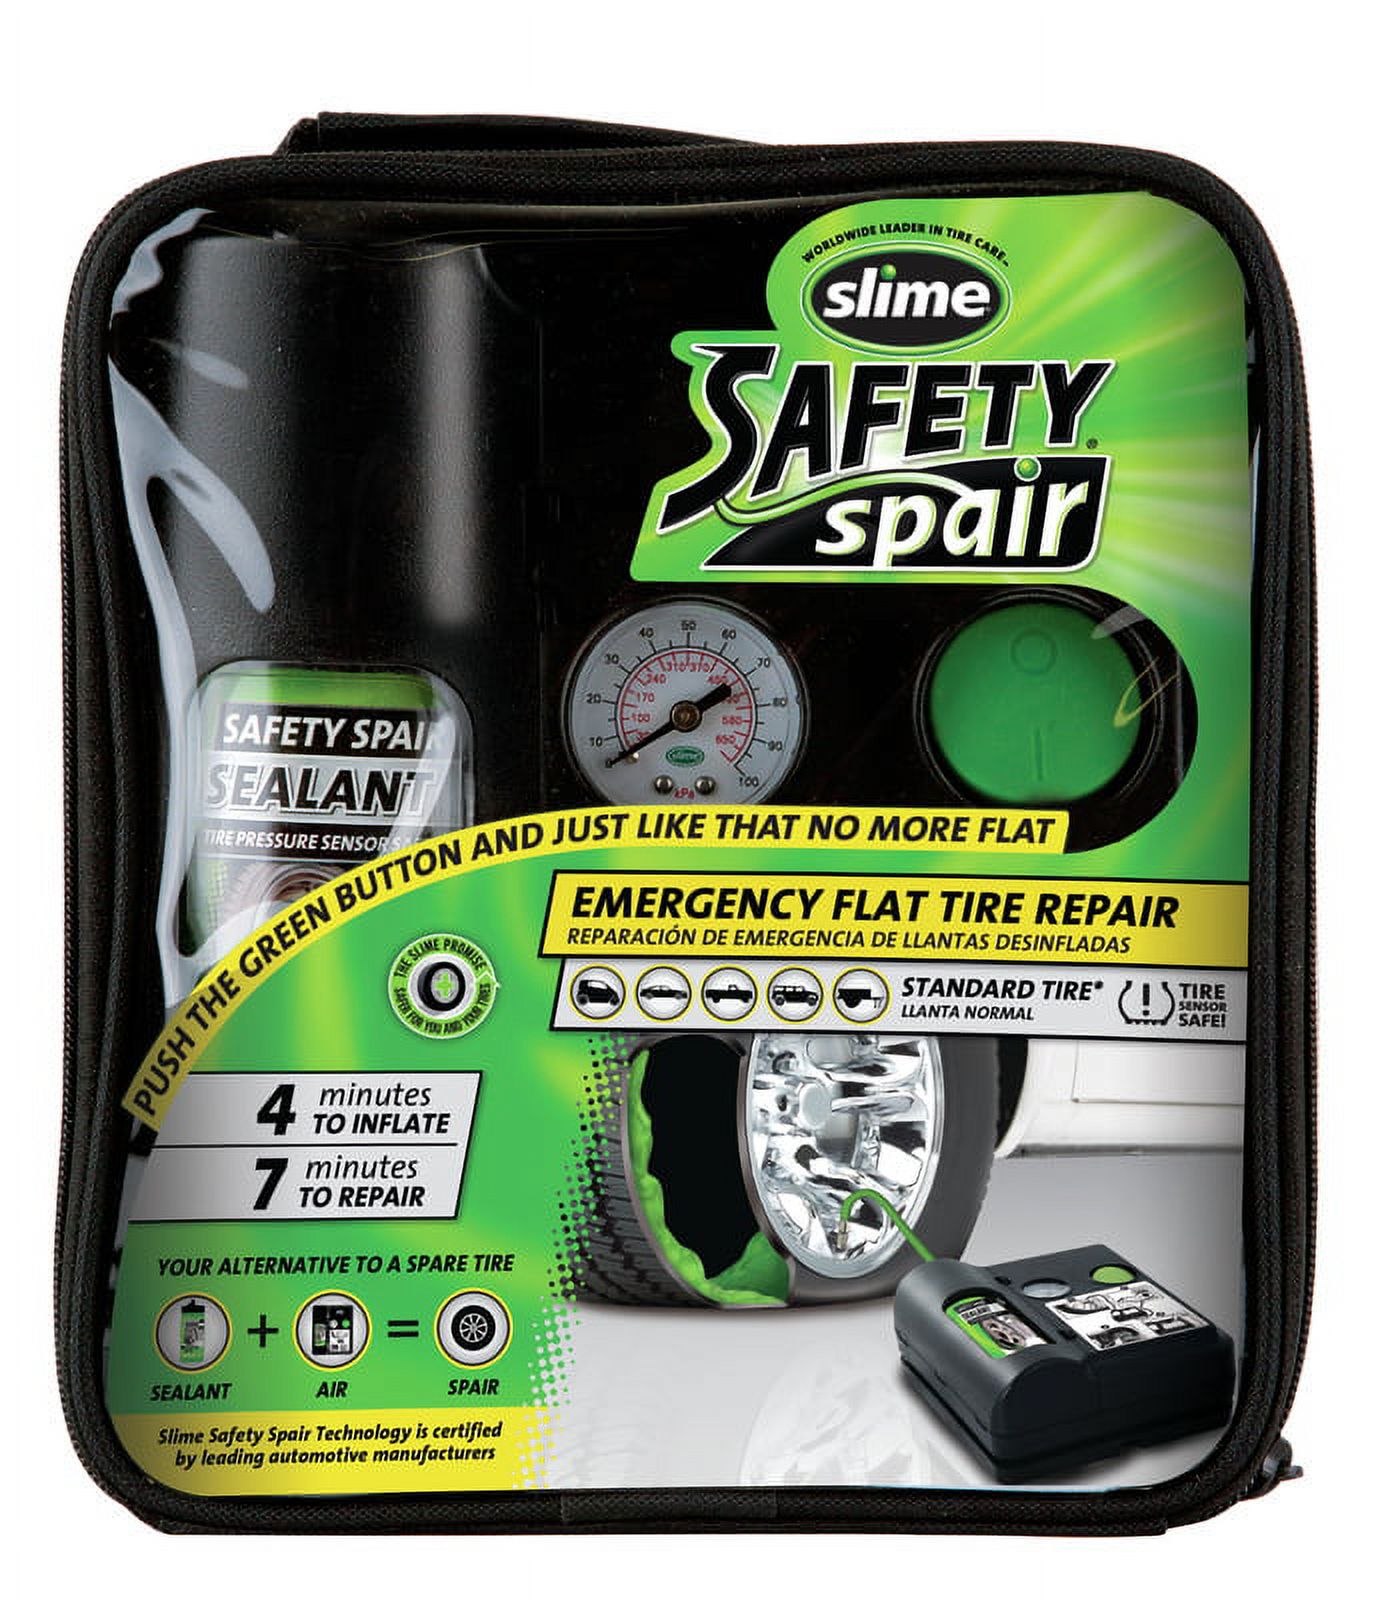 Slime-Safety Safety Spair System - 70005 - image 2 of 6